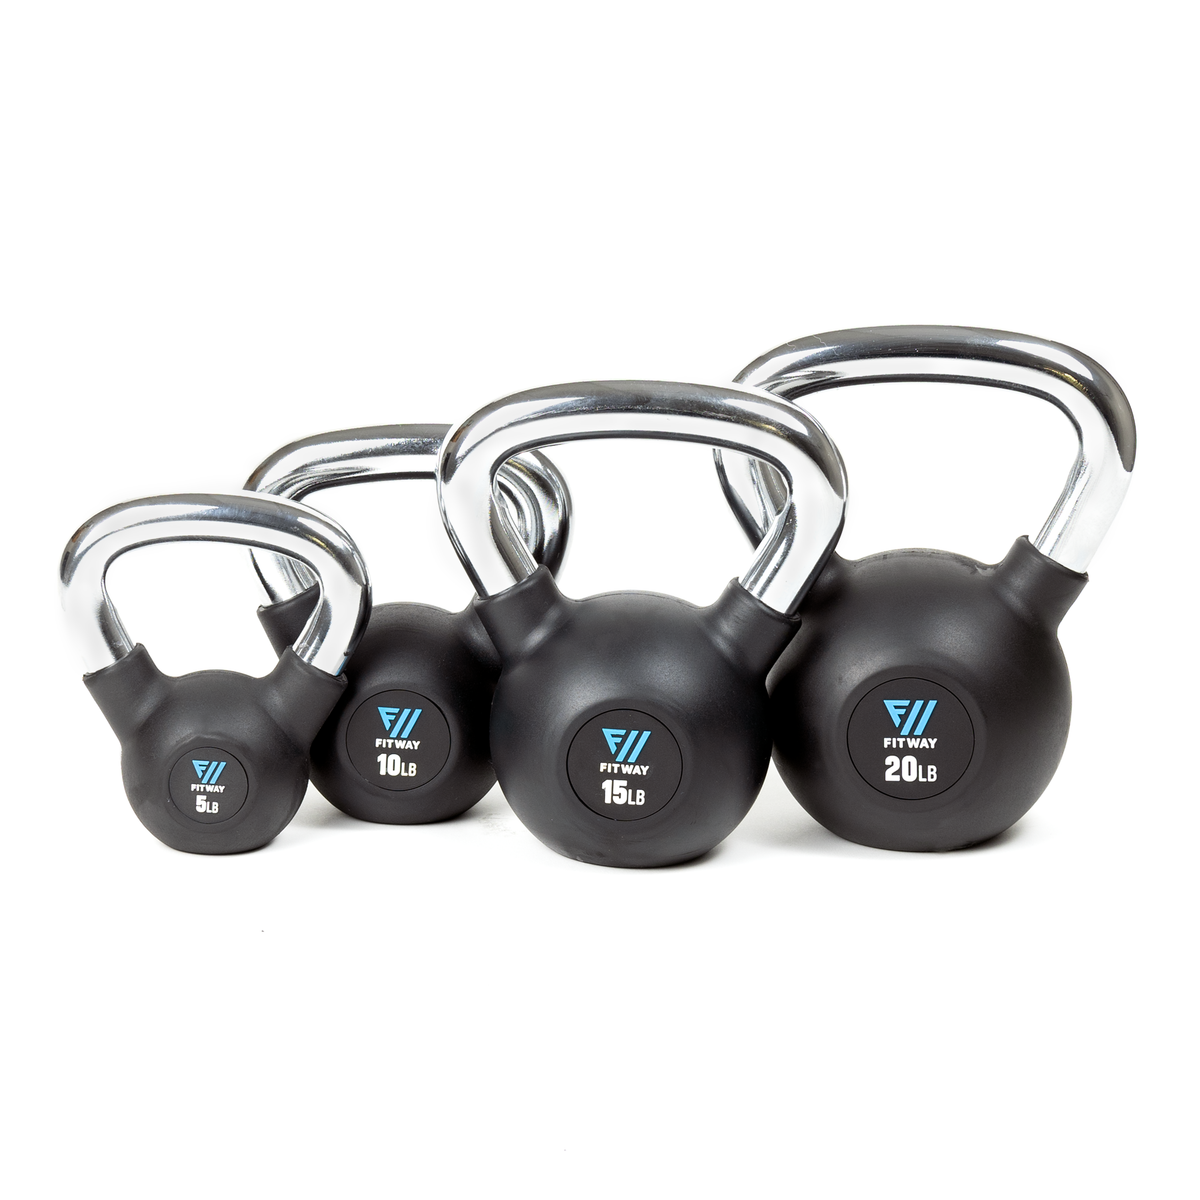 FitWay Equip. Rubber Coated 25lb Kettlebell